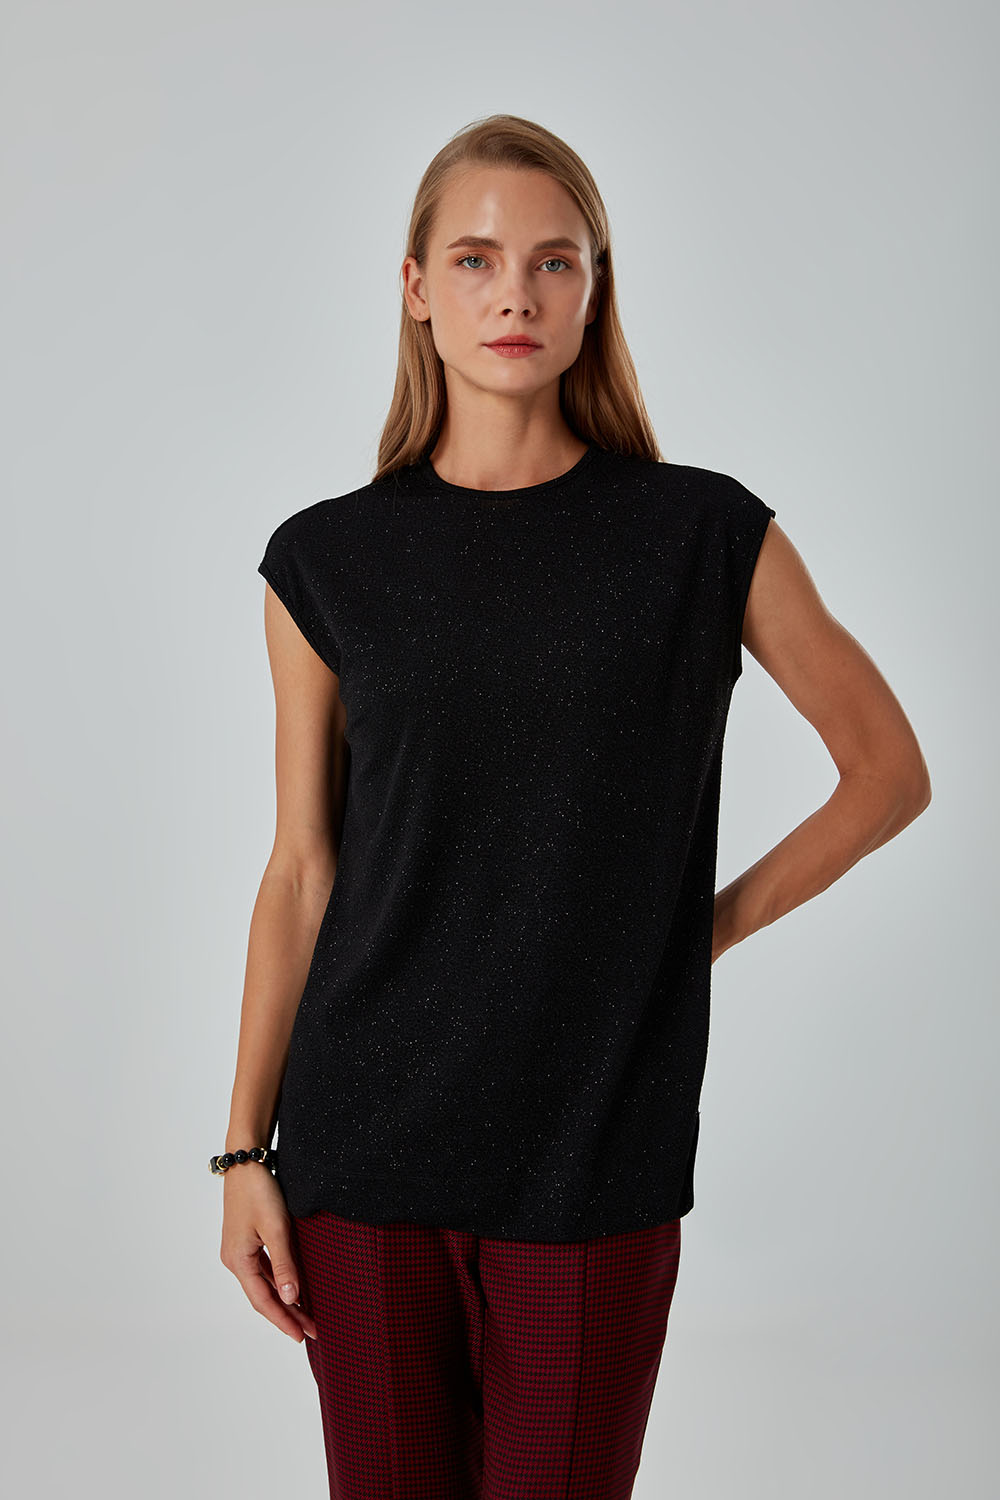 Crew Neck Knitted Black Body